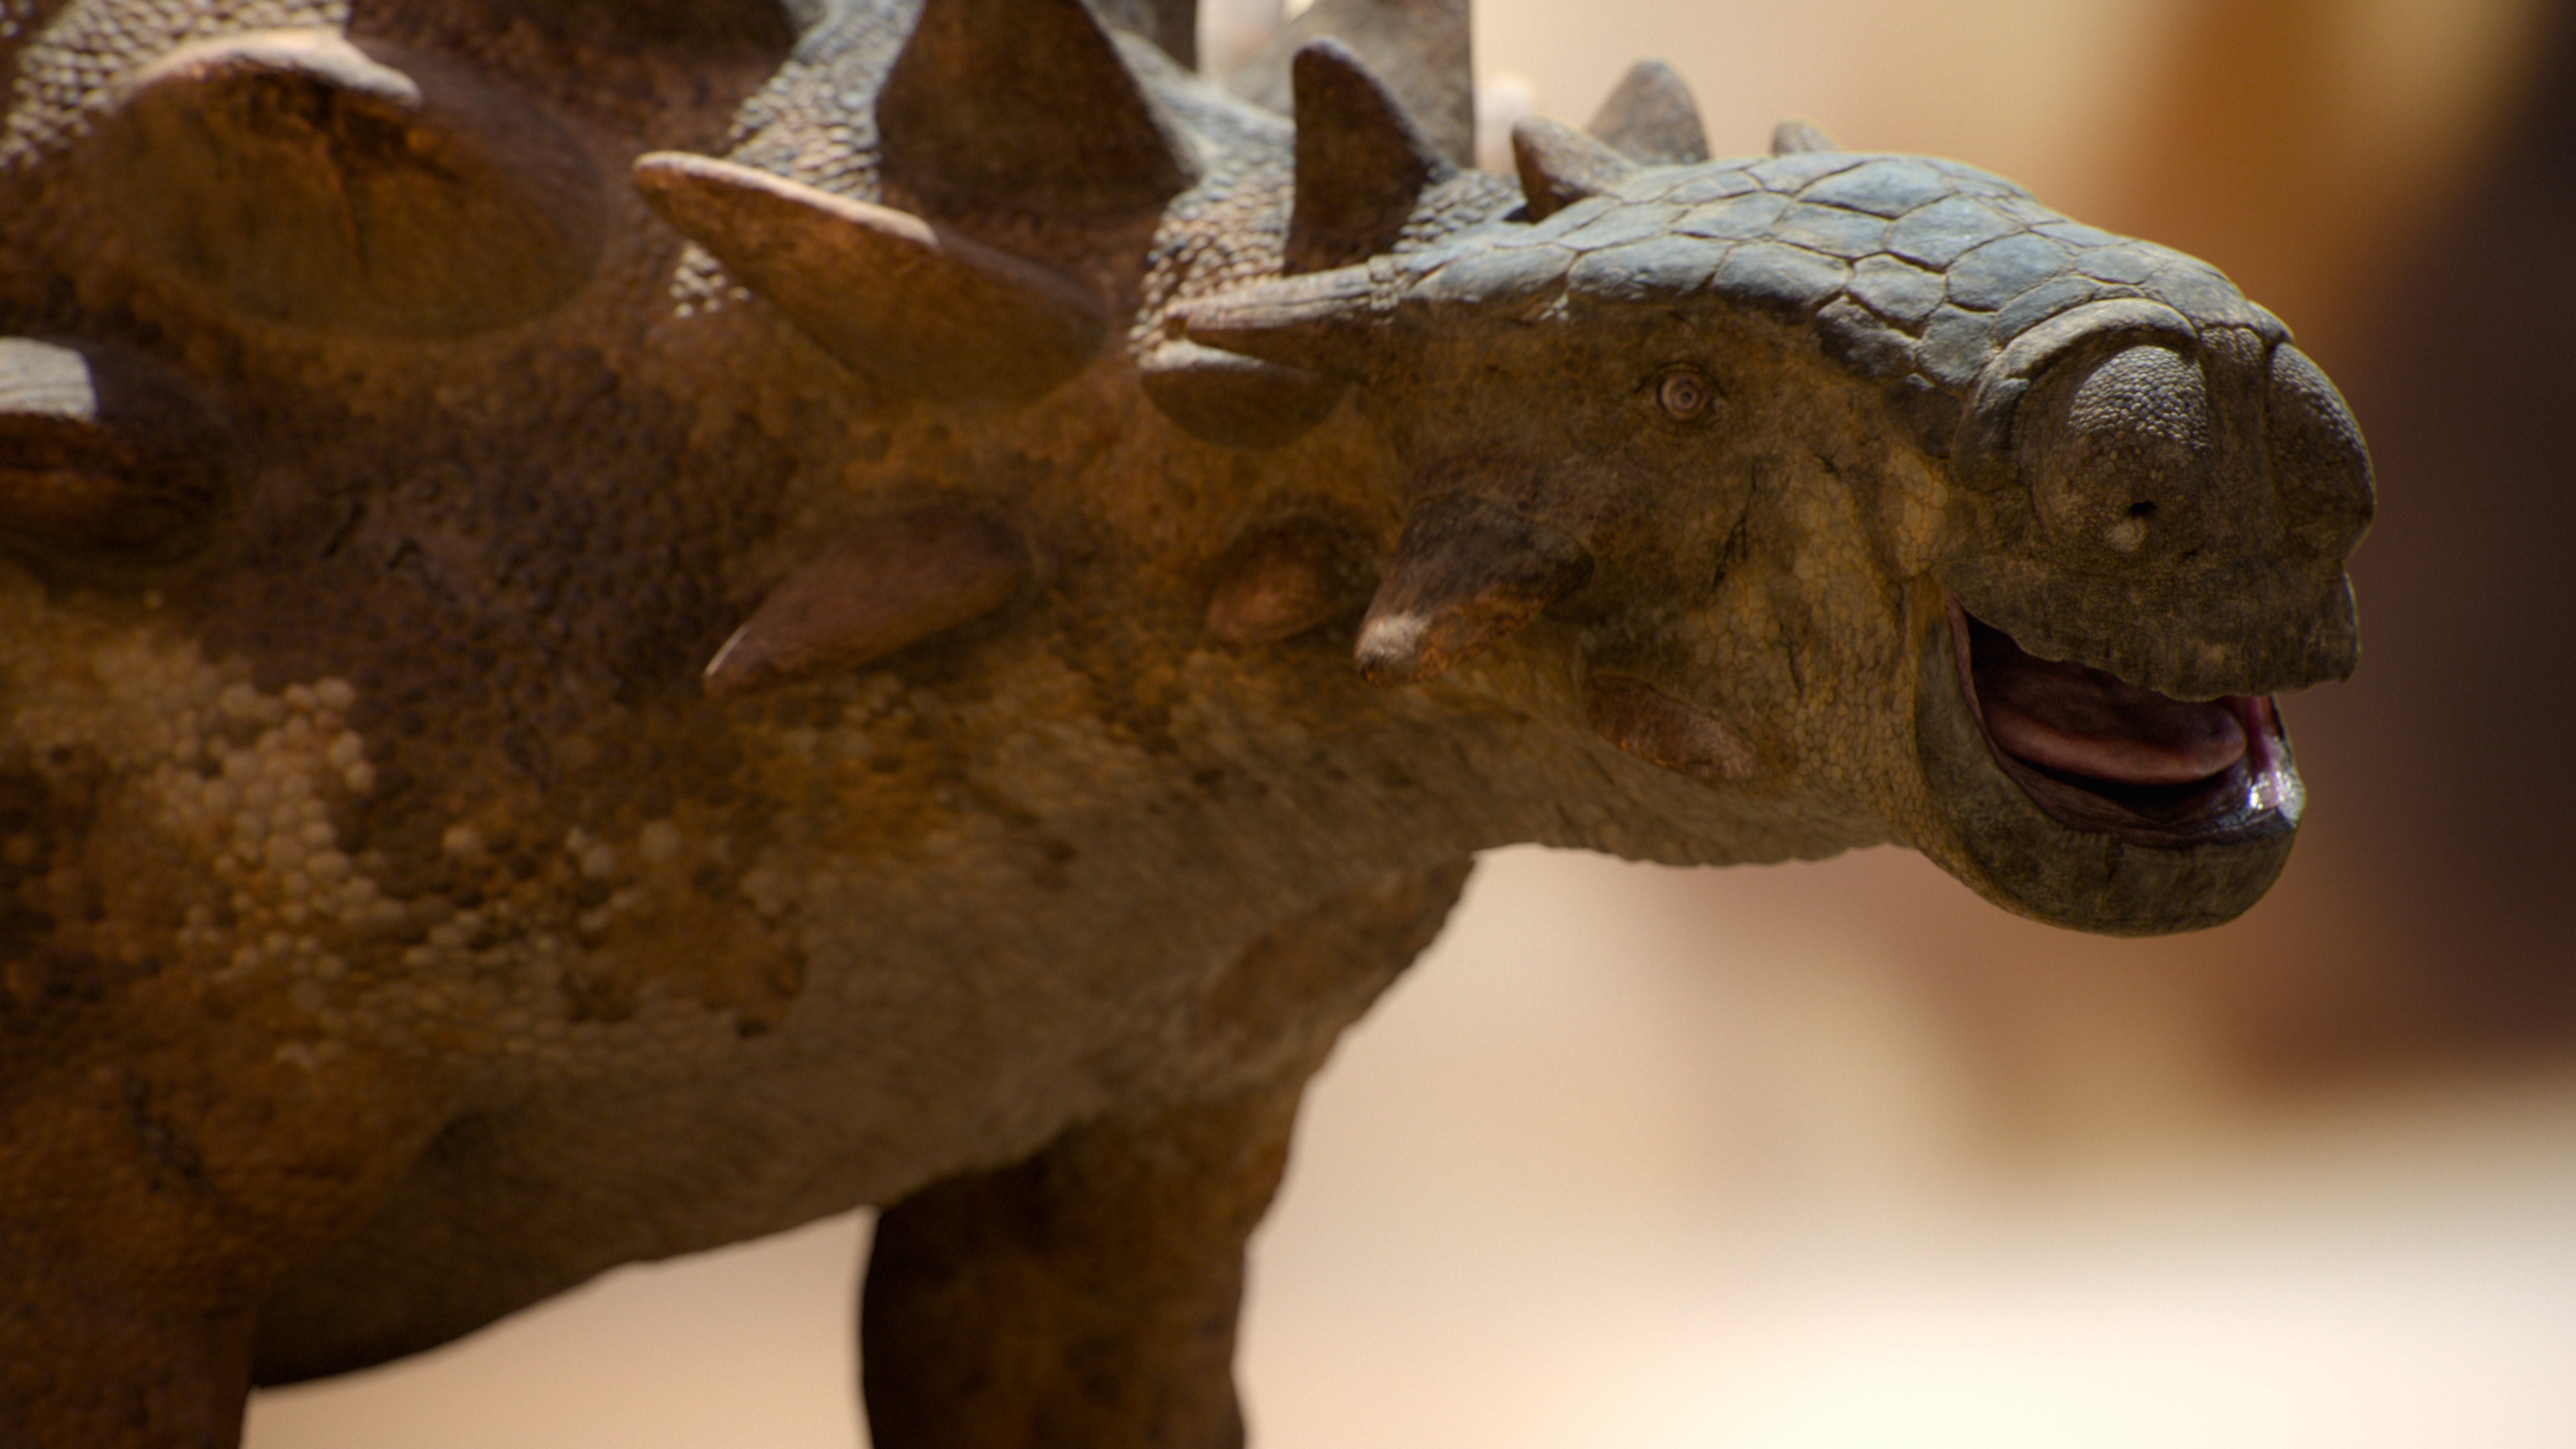 The ankylosaur Tarchia features in the new season's second episode. (Image: Apple TV+)